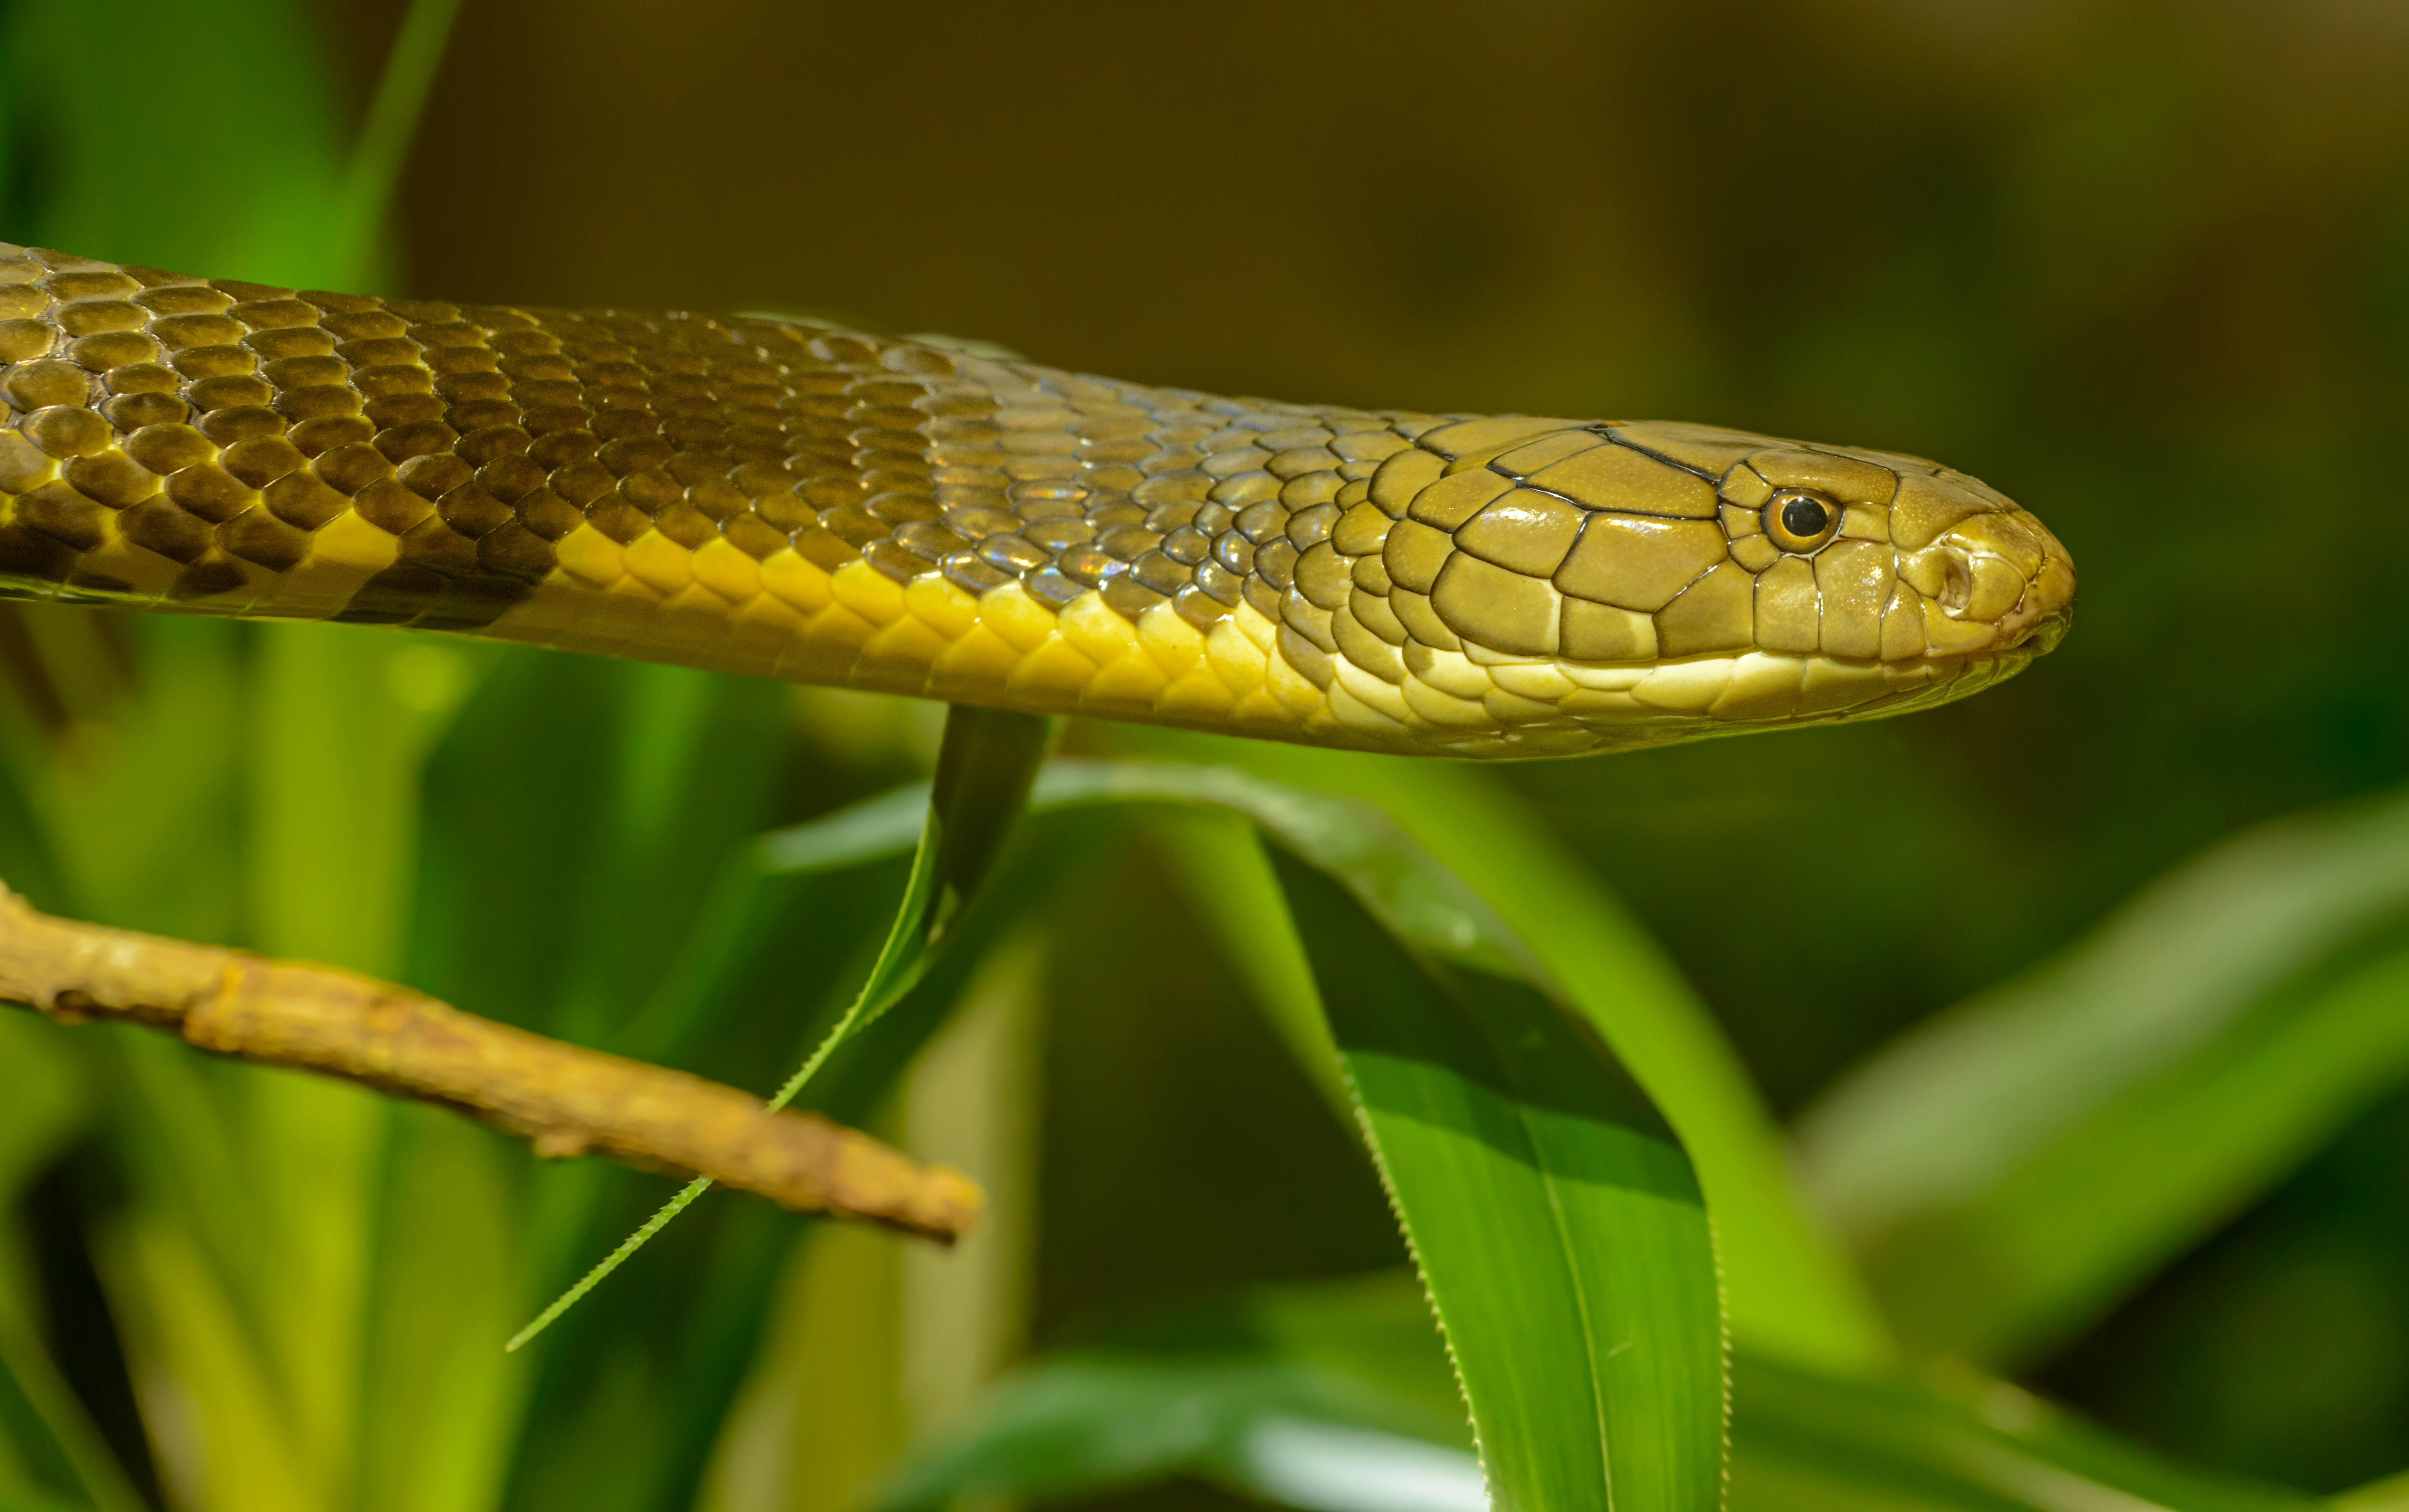 Snake in spain, close-up of a snake in grass